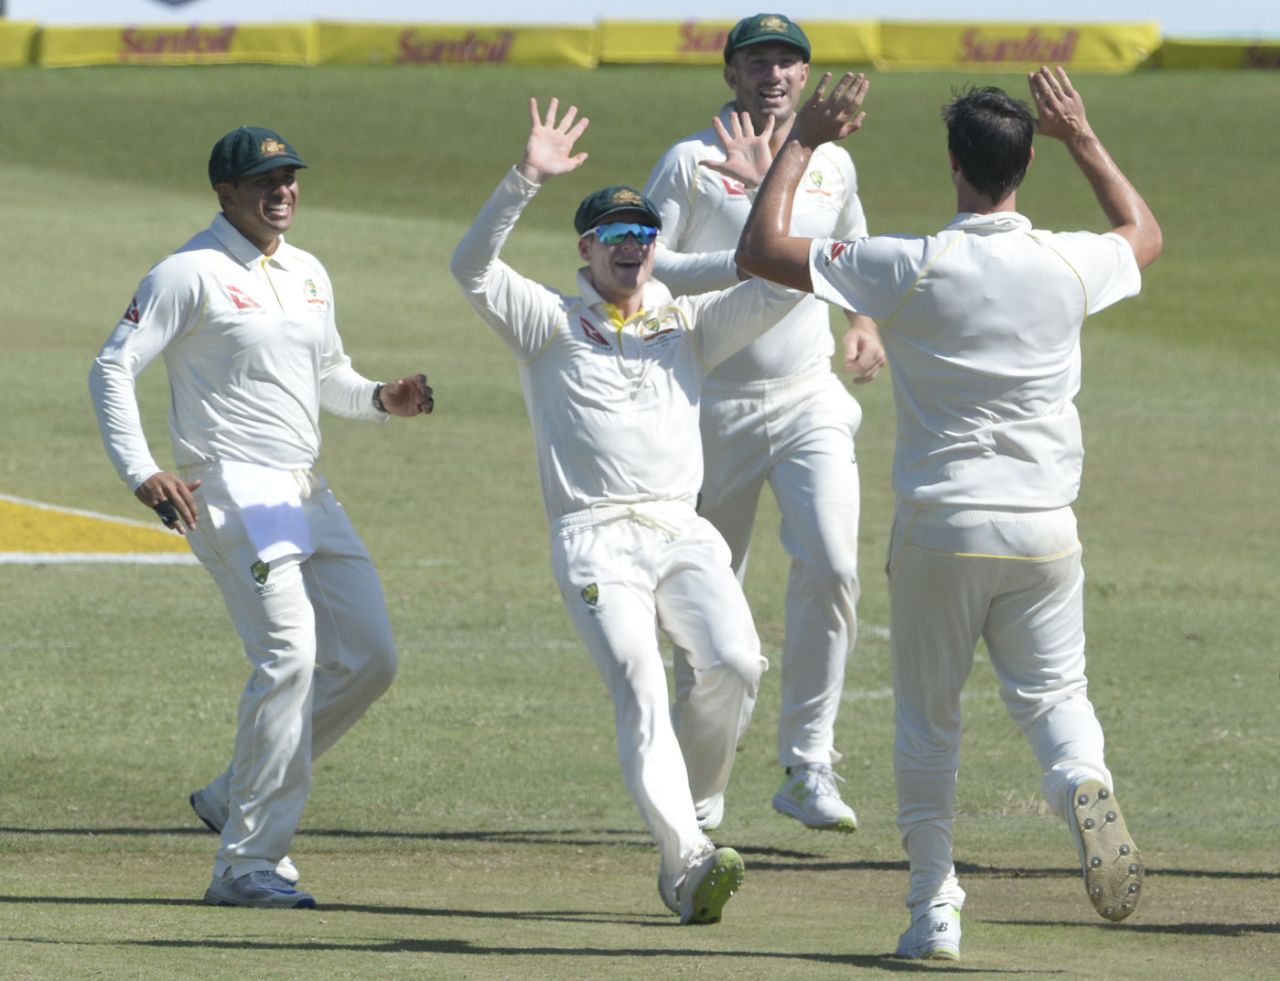 Steven Smith was delighted with Pat Cummins' breakthrough, South Africa v Australia, 1st Test, Durban, 2nd day, March 2, 2018